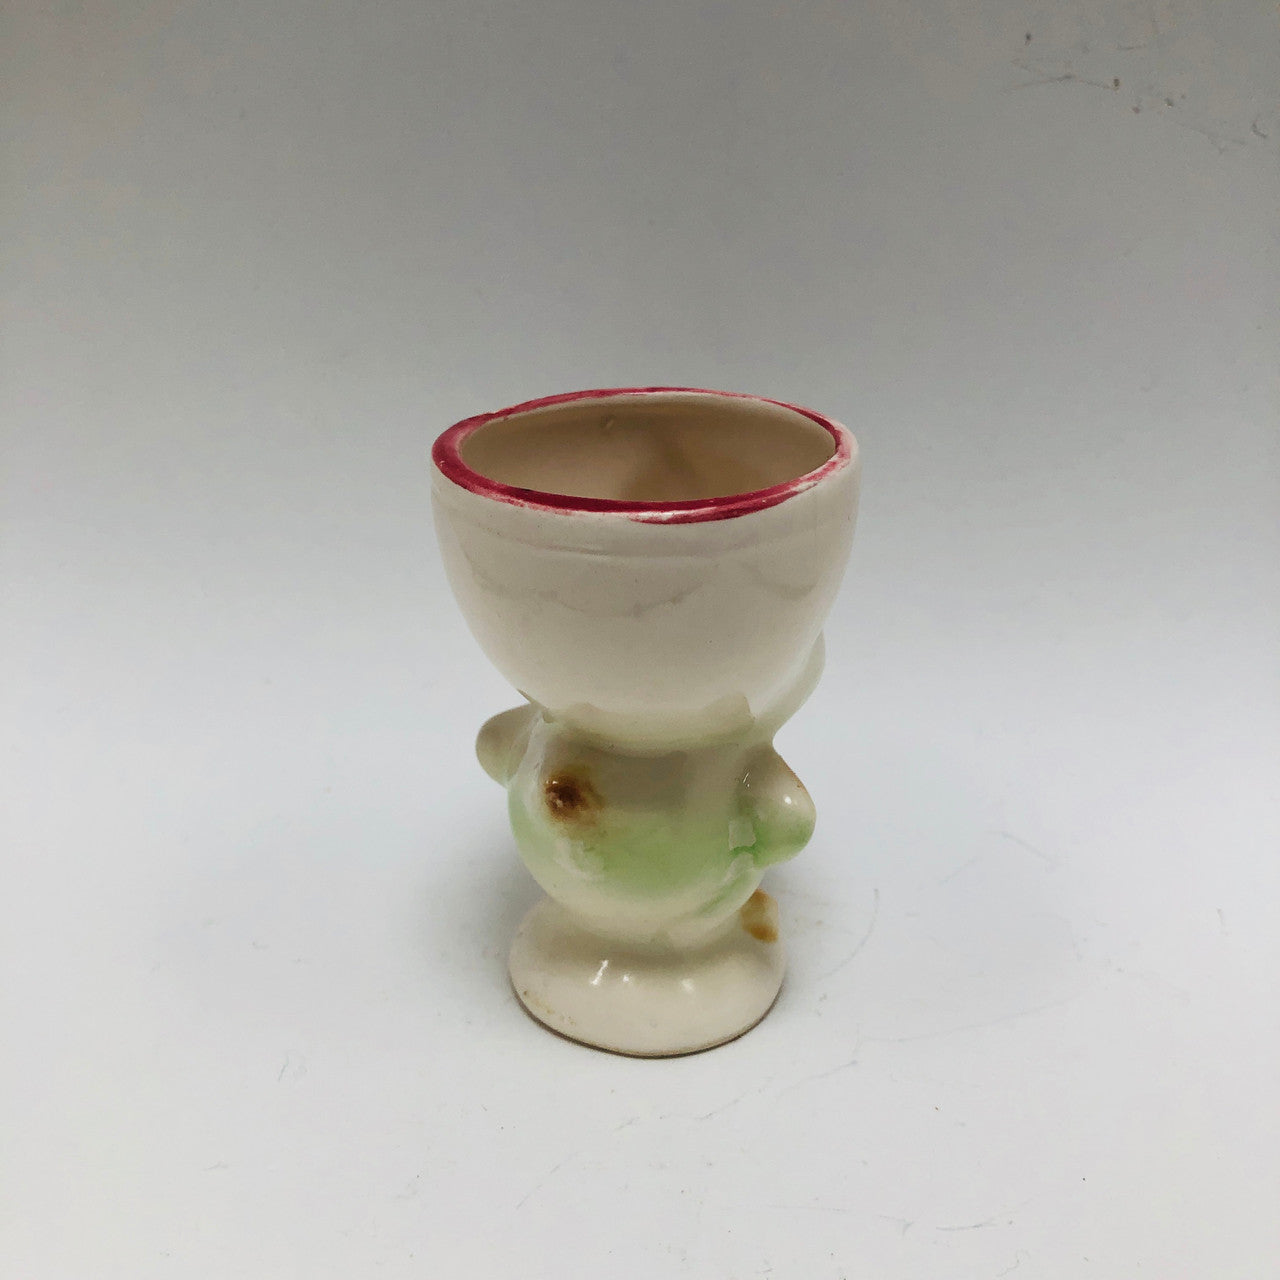 Ceramic Barton Chick painted egg-cup